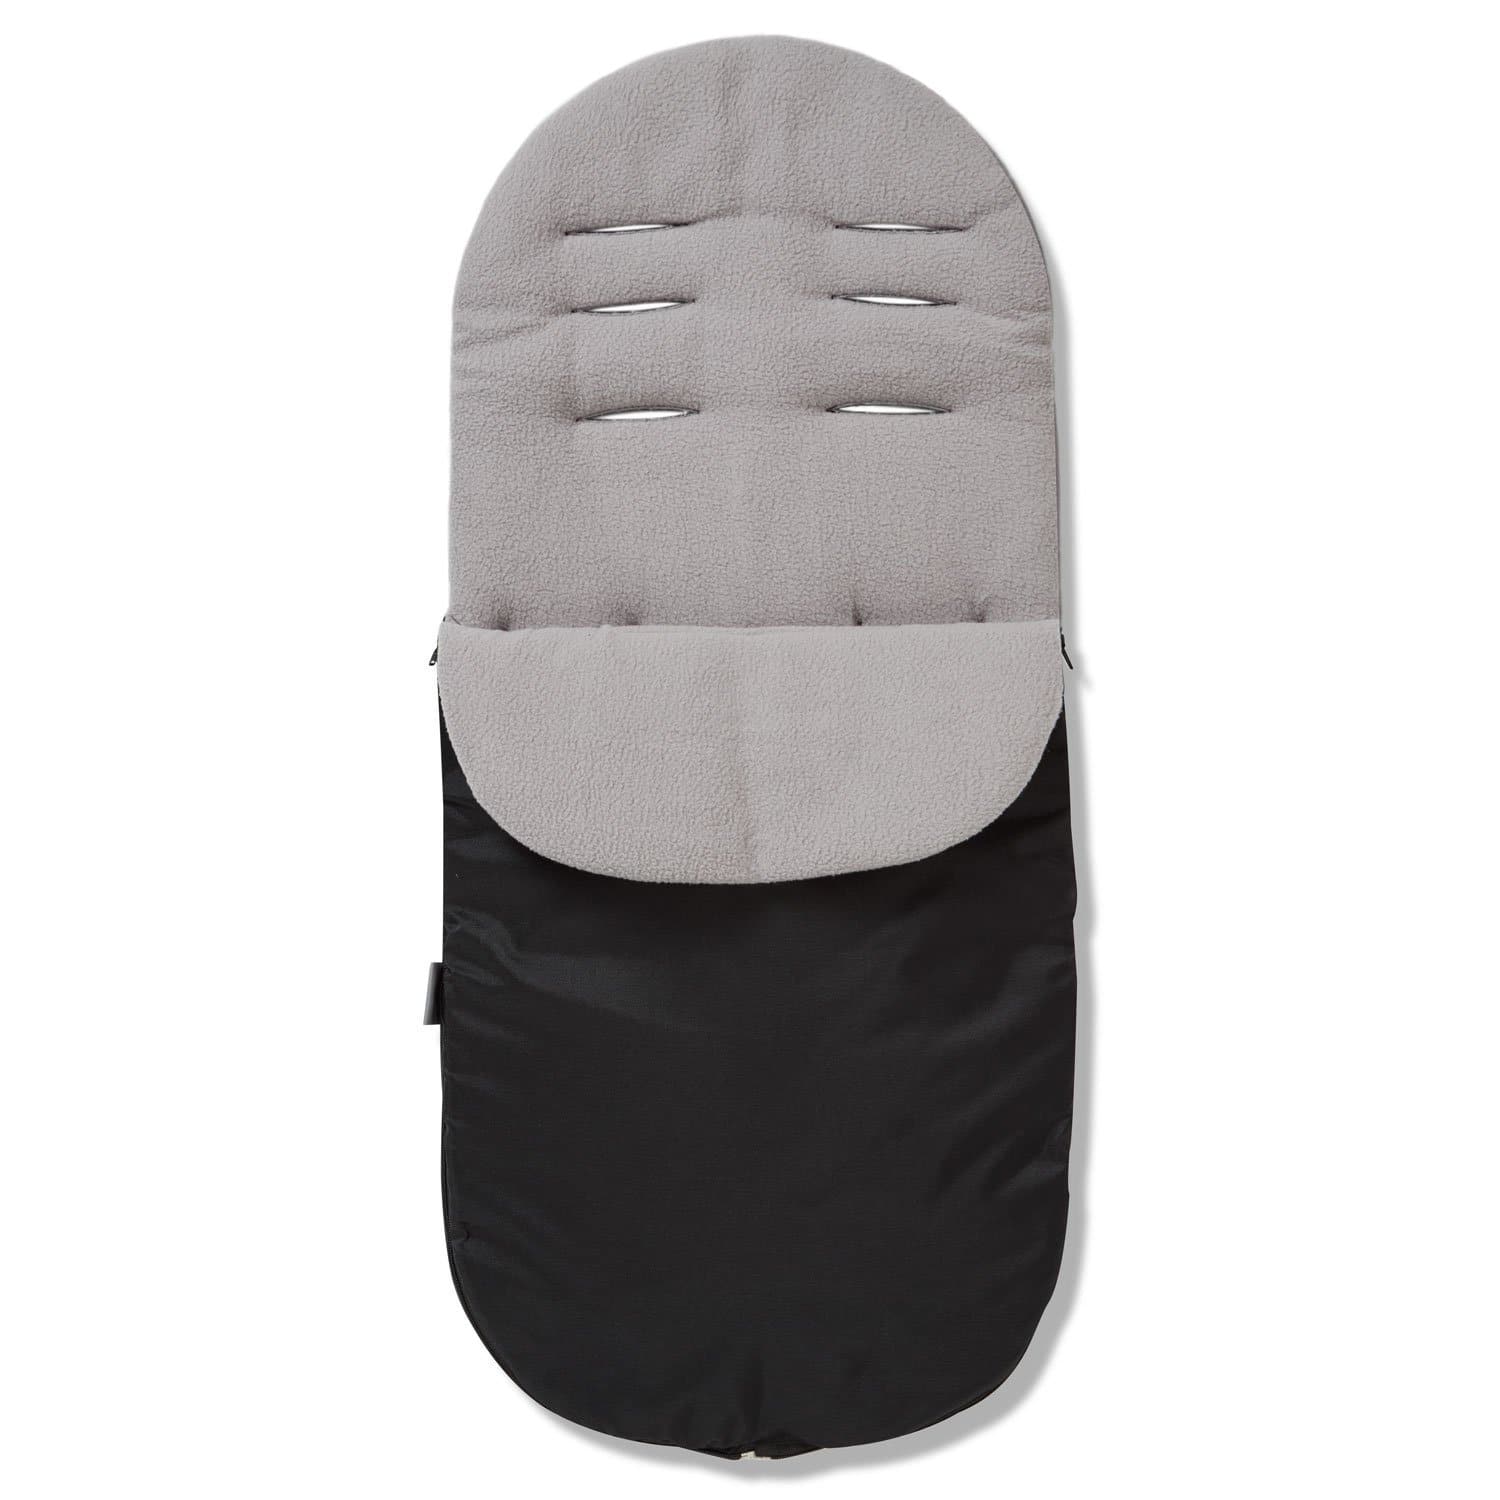 Footmuff / Cosy Toes Compatible with Nurse - Grey / Fits All Models | For Your Little One